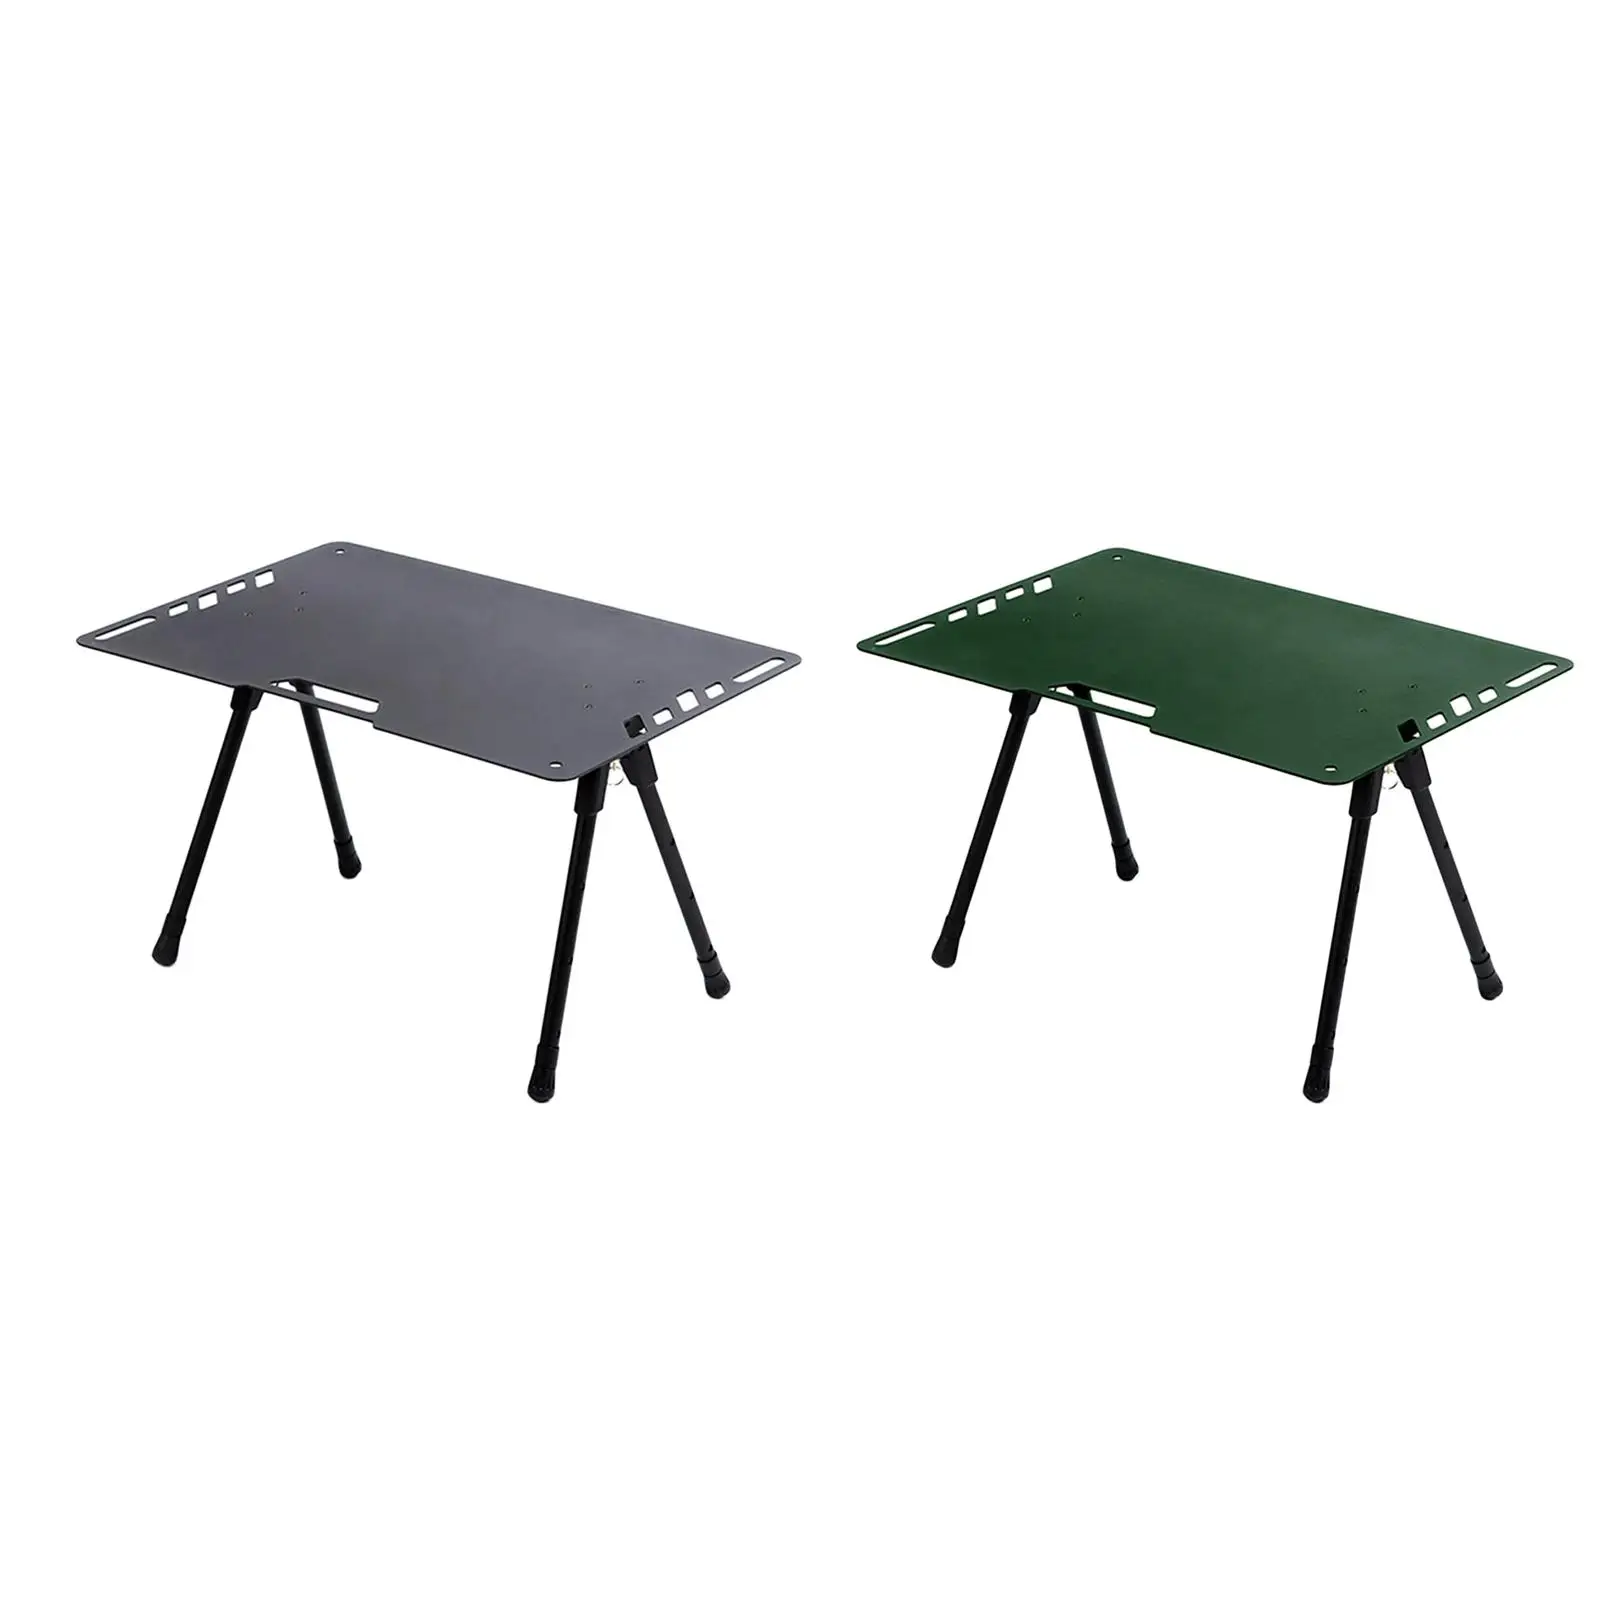 Camping Folding Tables Camp Table Portable Beach Tables Side Table Coffee Table for Cooking Patio Hiking Lantern Lamp Holder